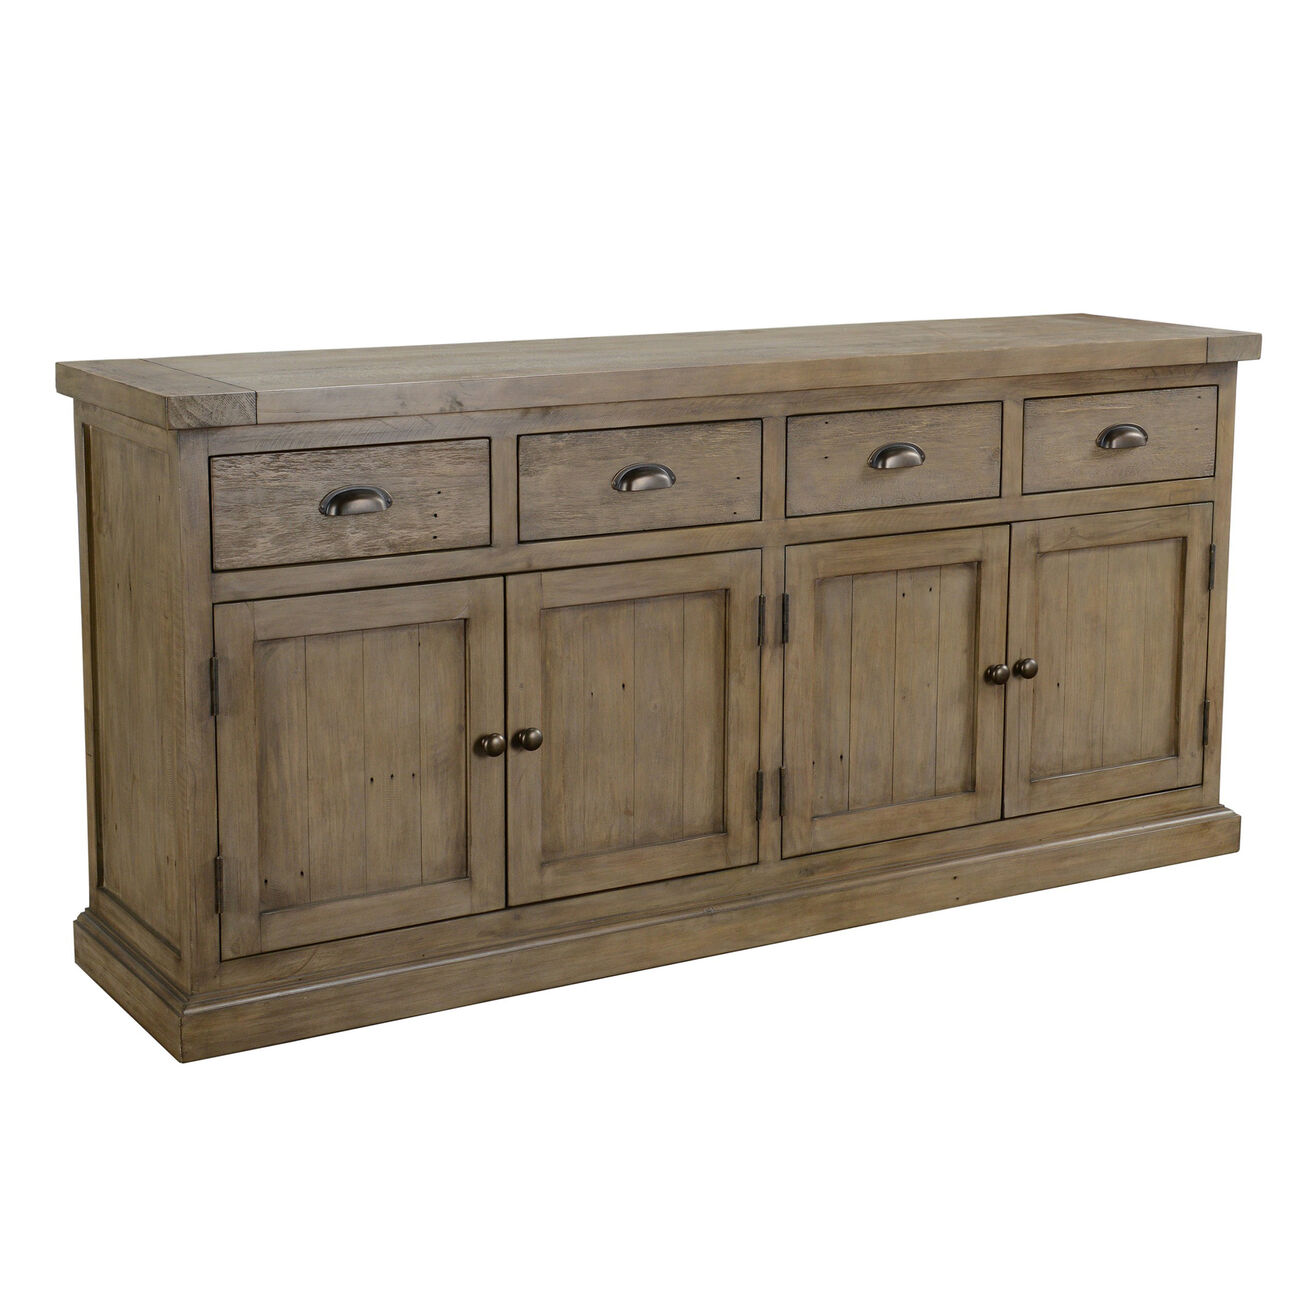 4 Drawer Transitional Wooden Sideboard with Cabinet Storage, Brown